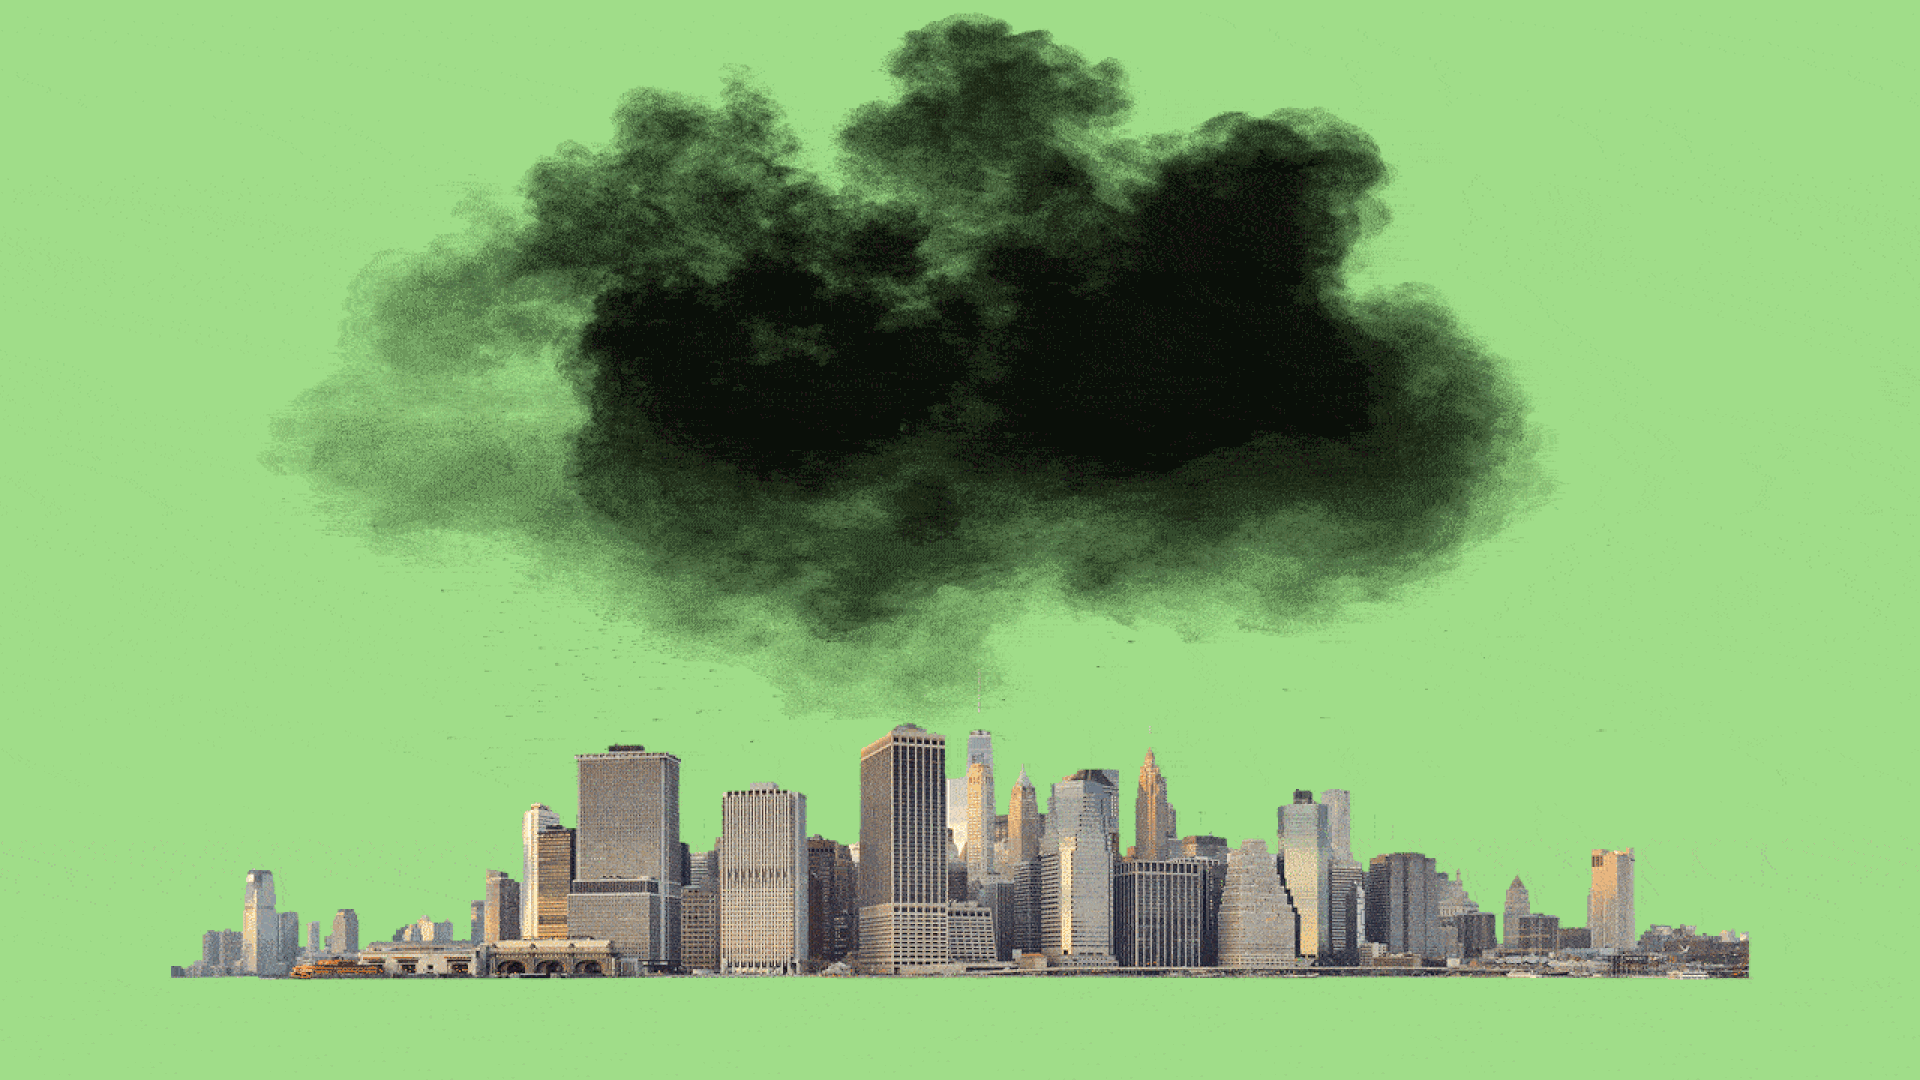 Animated illustration of smog disappearing from above a city skyline